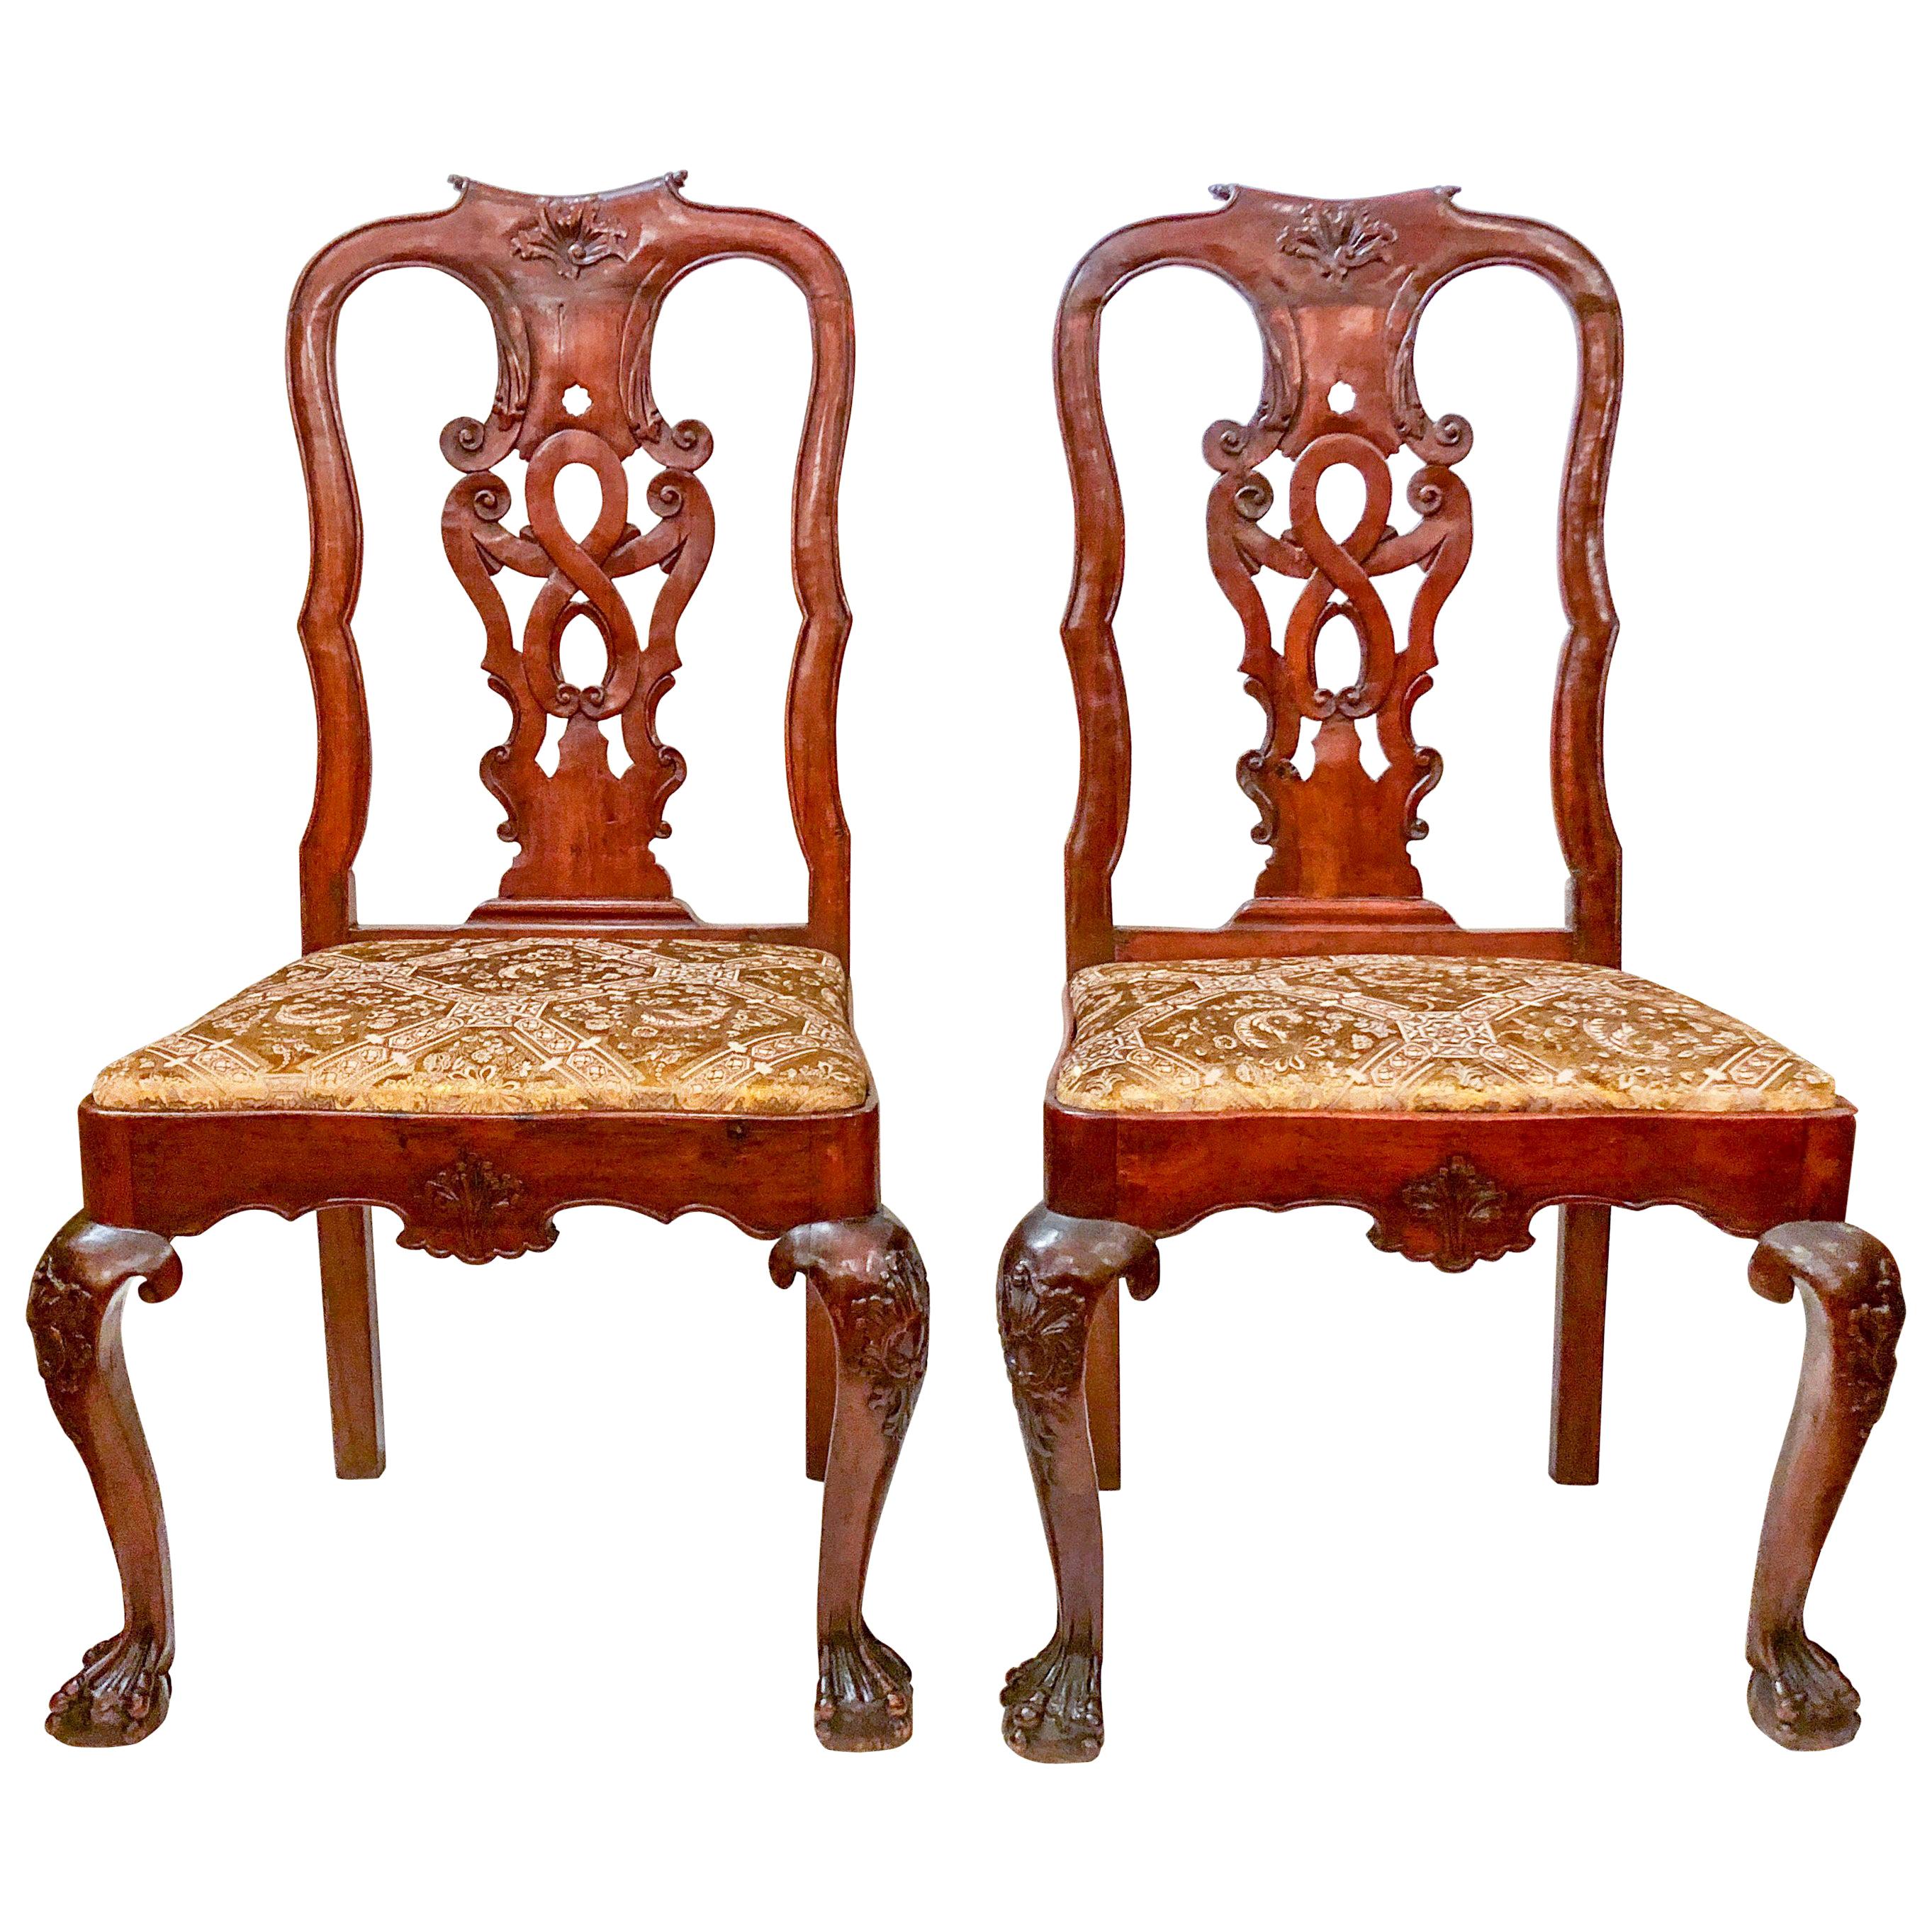 Pair of Antique 18th Century Queen Anne Mahogany Side Chairs